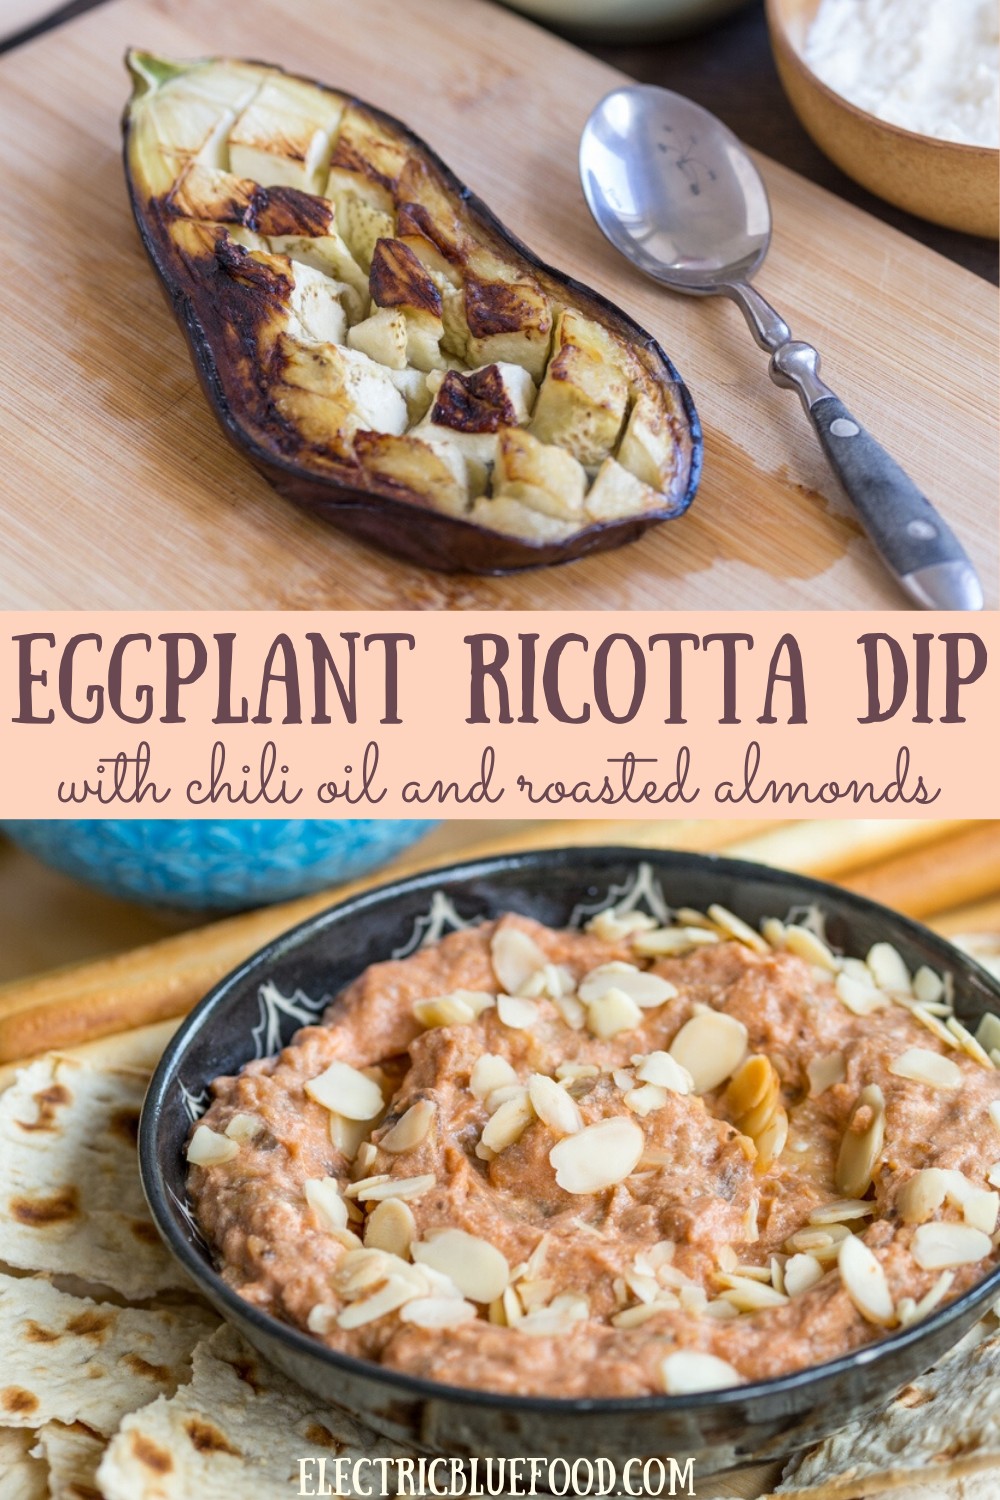 This creamy eggplant ricotta dip is perfect if you want a break from usual dips. Roasted eggplants, ricotta, tomato paste and chili oil give this eggplant dip a wonderful flavour. Top with roasted shaved almonds to achieve dip perfection!